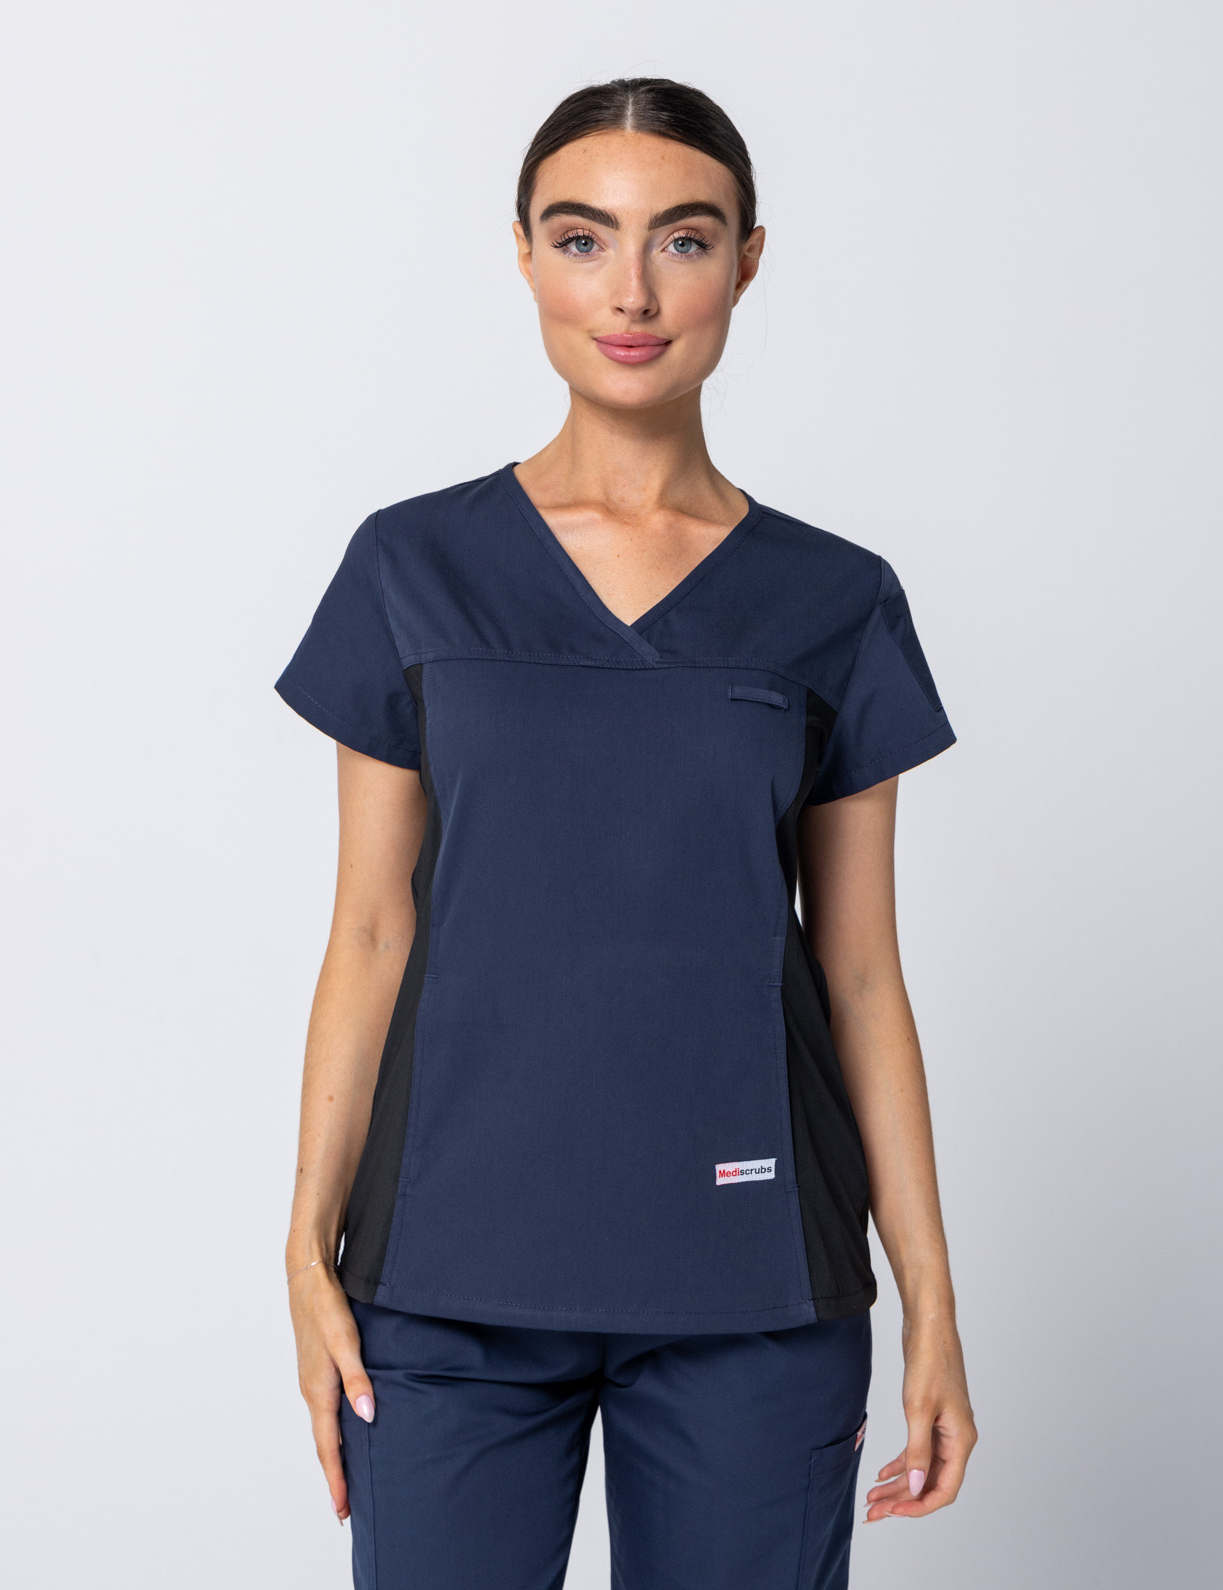 Women's Fit Solid Scrub Top With Spandex Panel - Navy - 2X Large